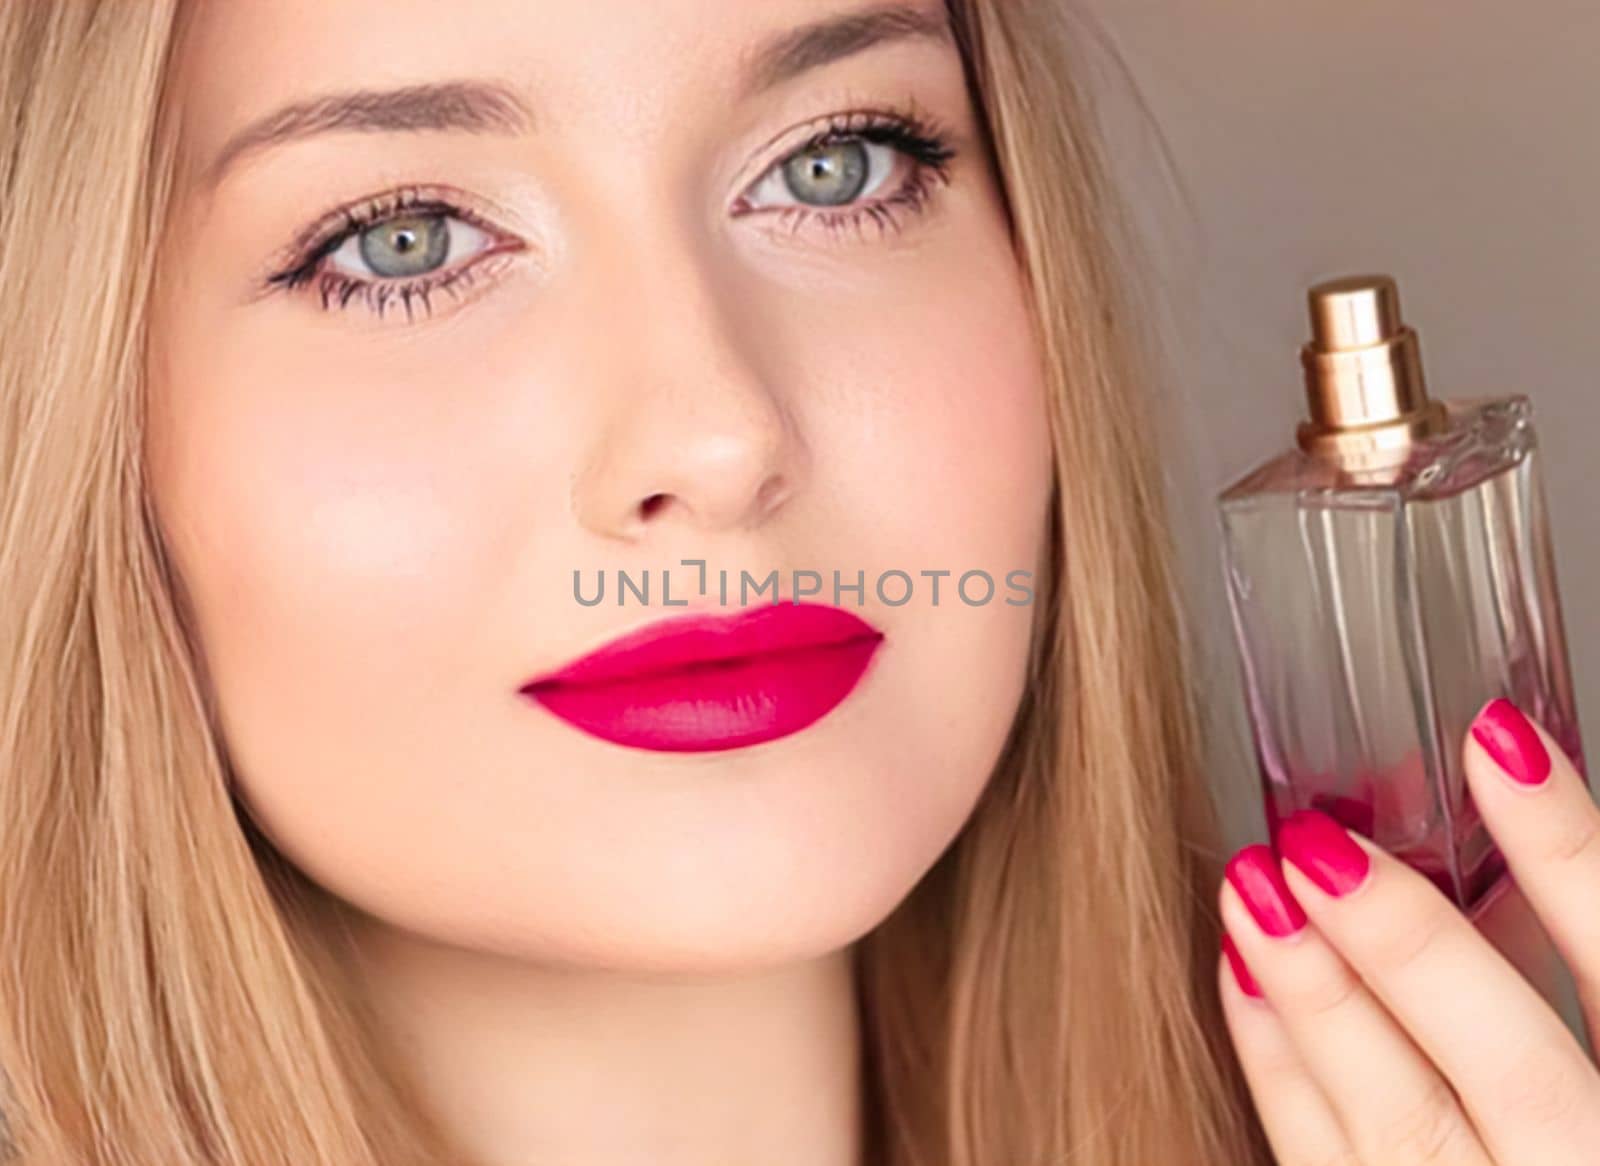 Beauty product, perfume and cosmetics, face portrait of beautiful woman with perfume or fragrance bottle of floral scent for luxury cosmetic, glamour and fashion.